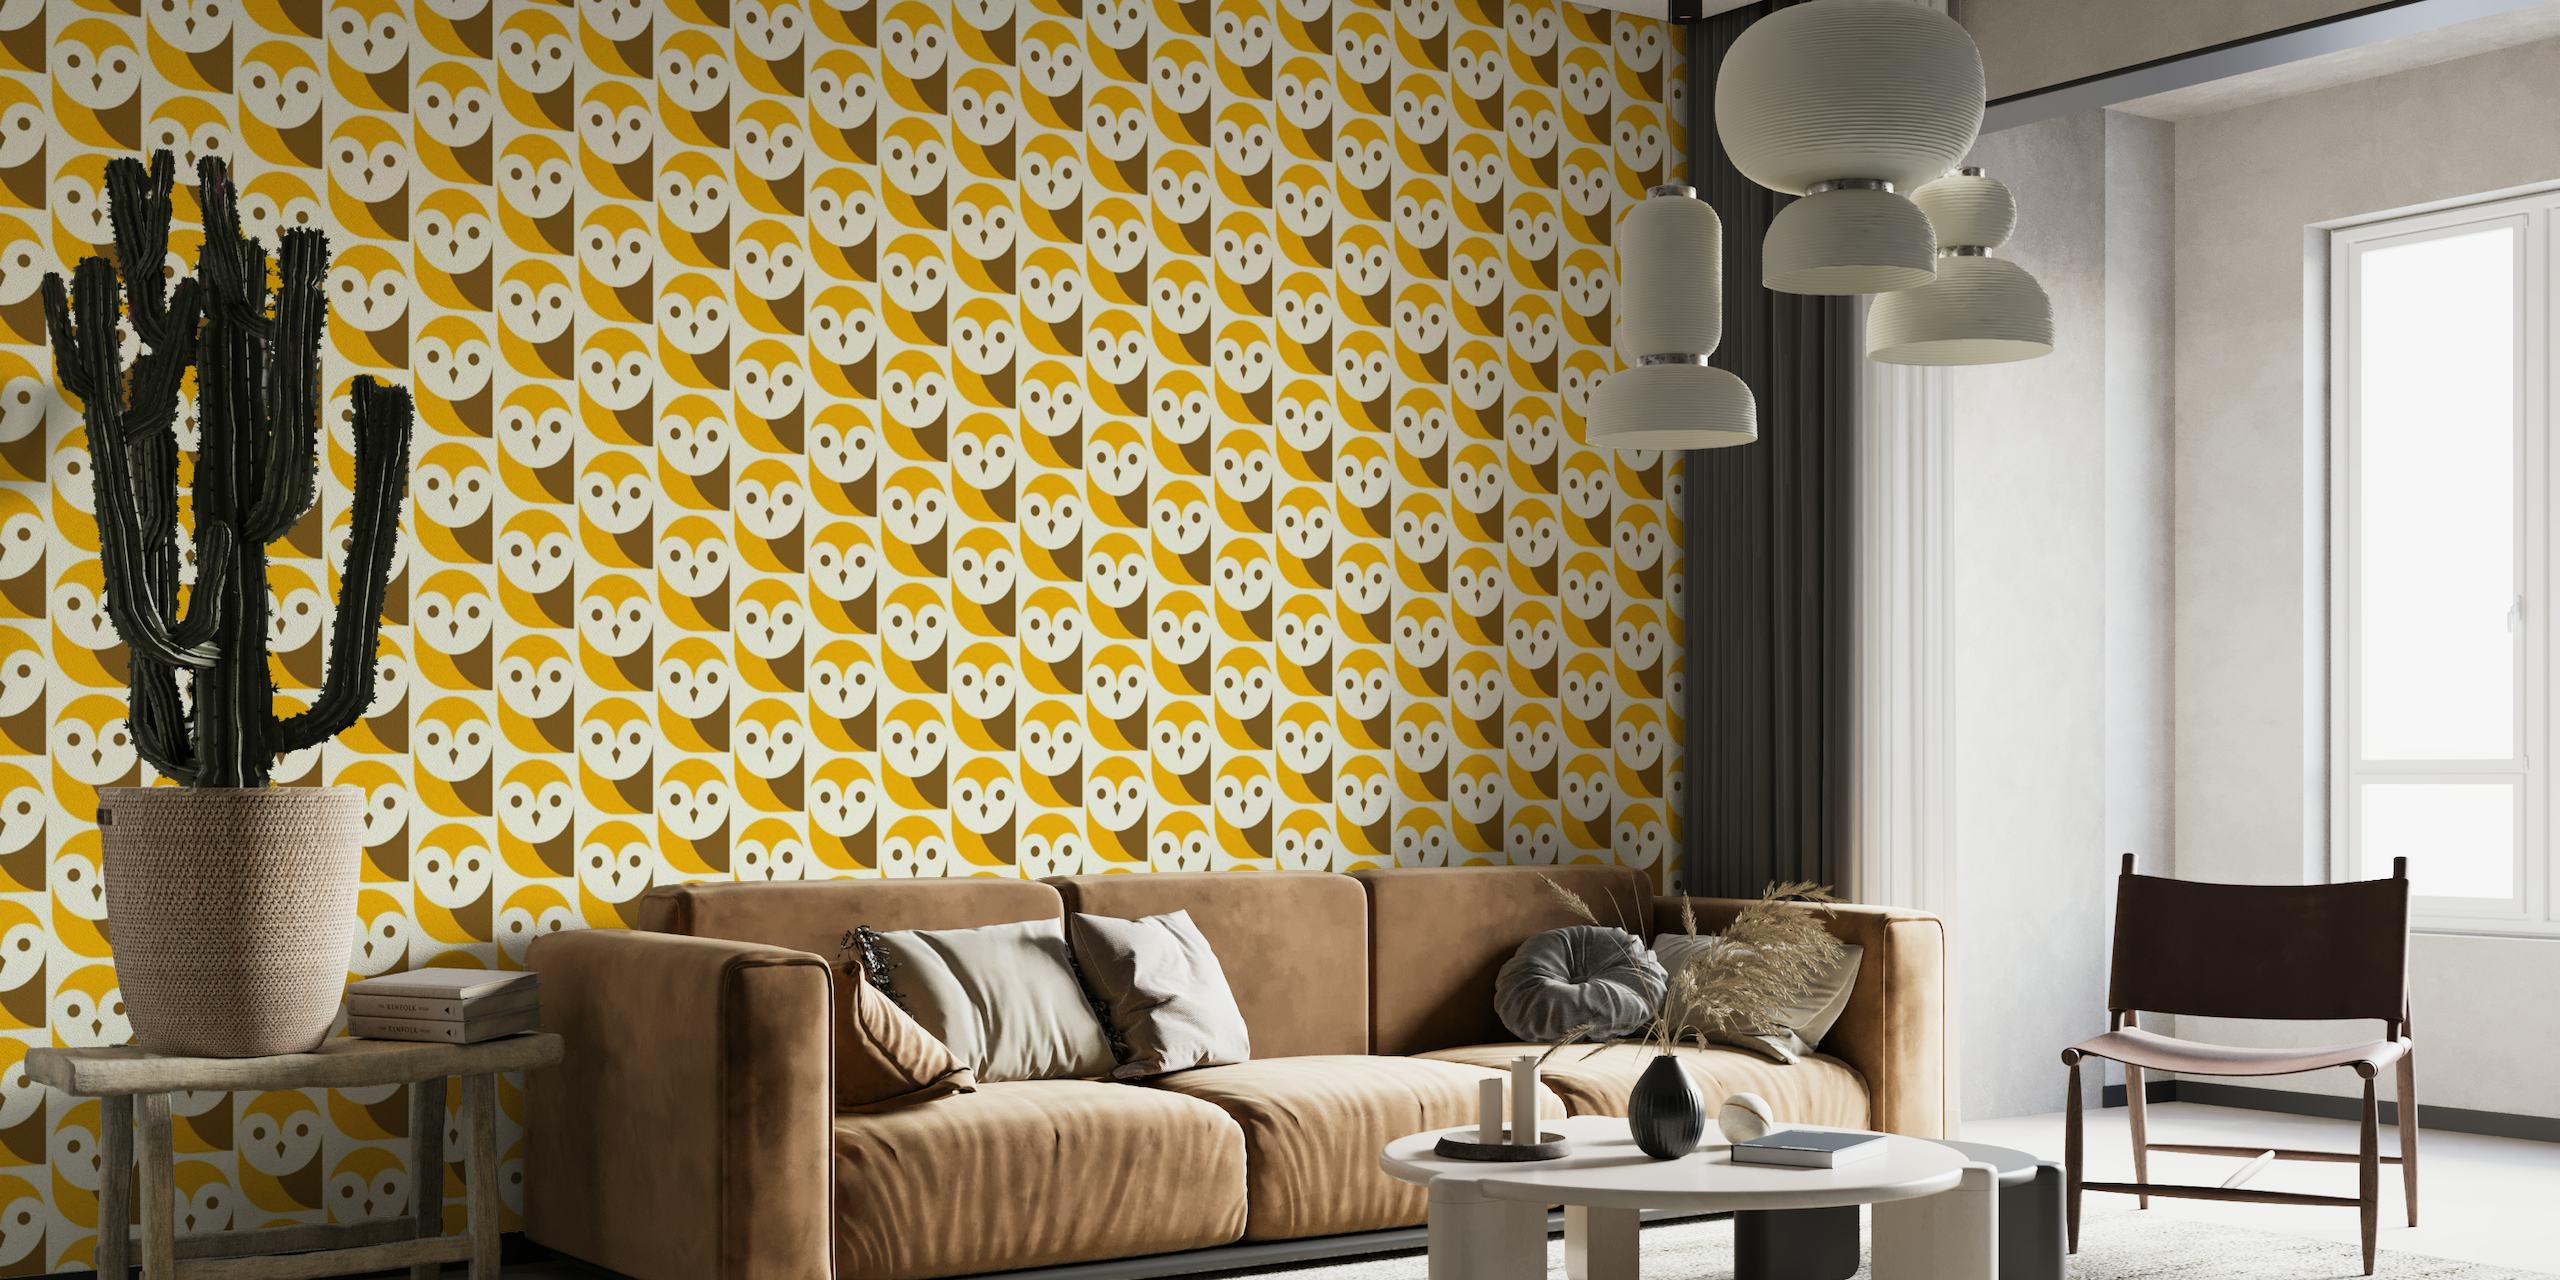 Wall mural with modern retro owls in yellow and brown